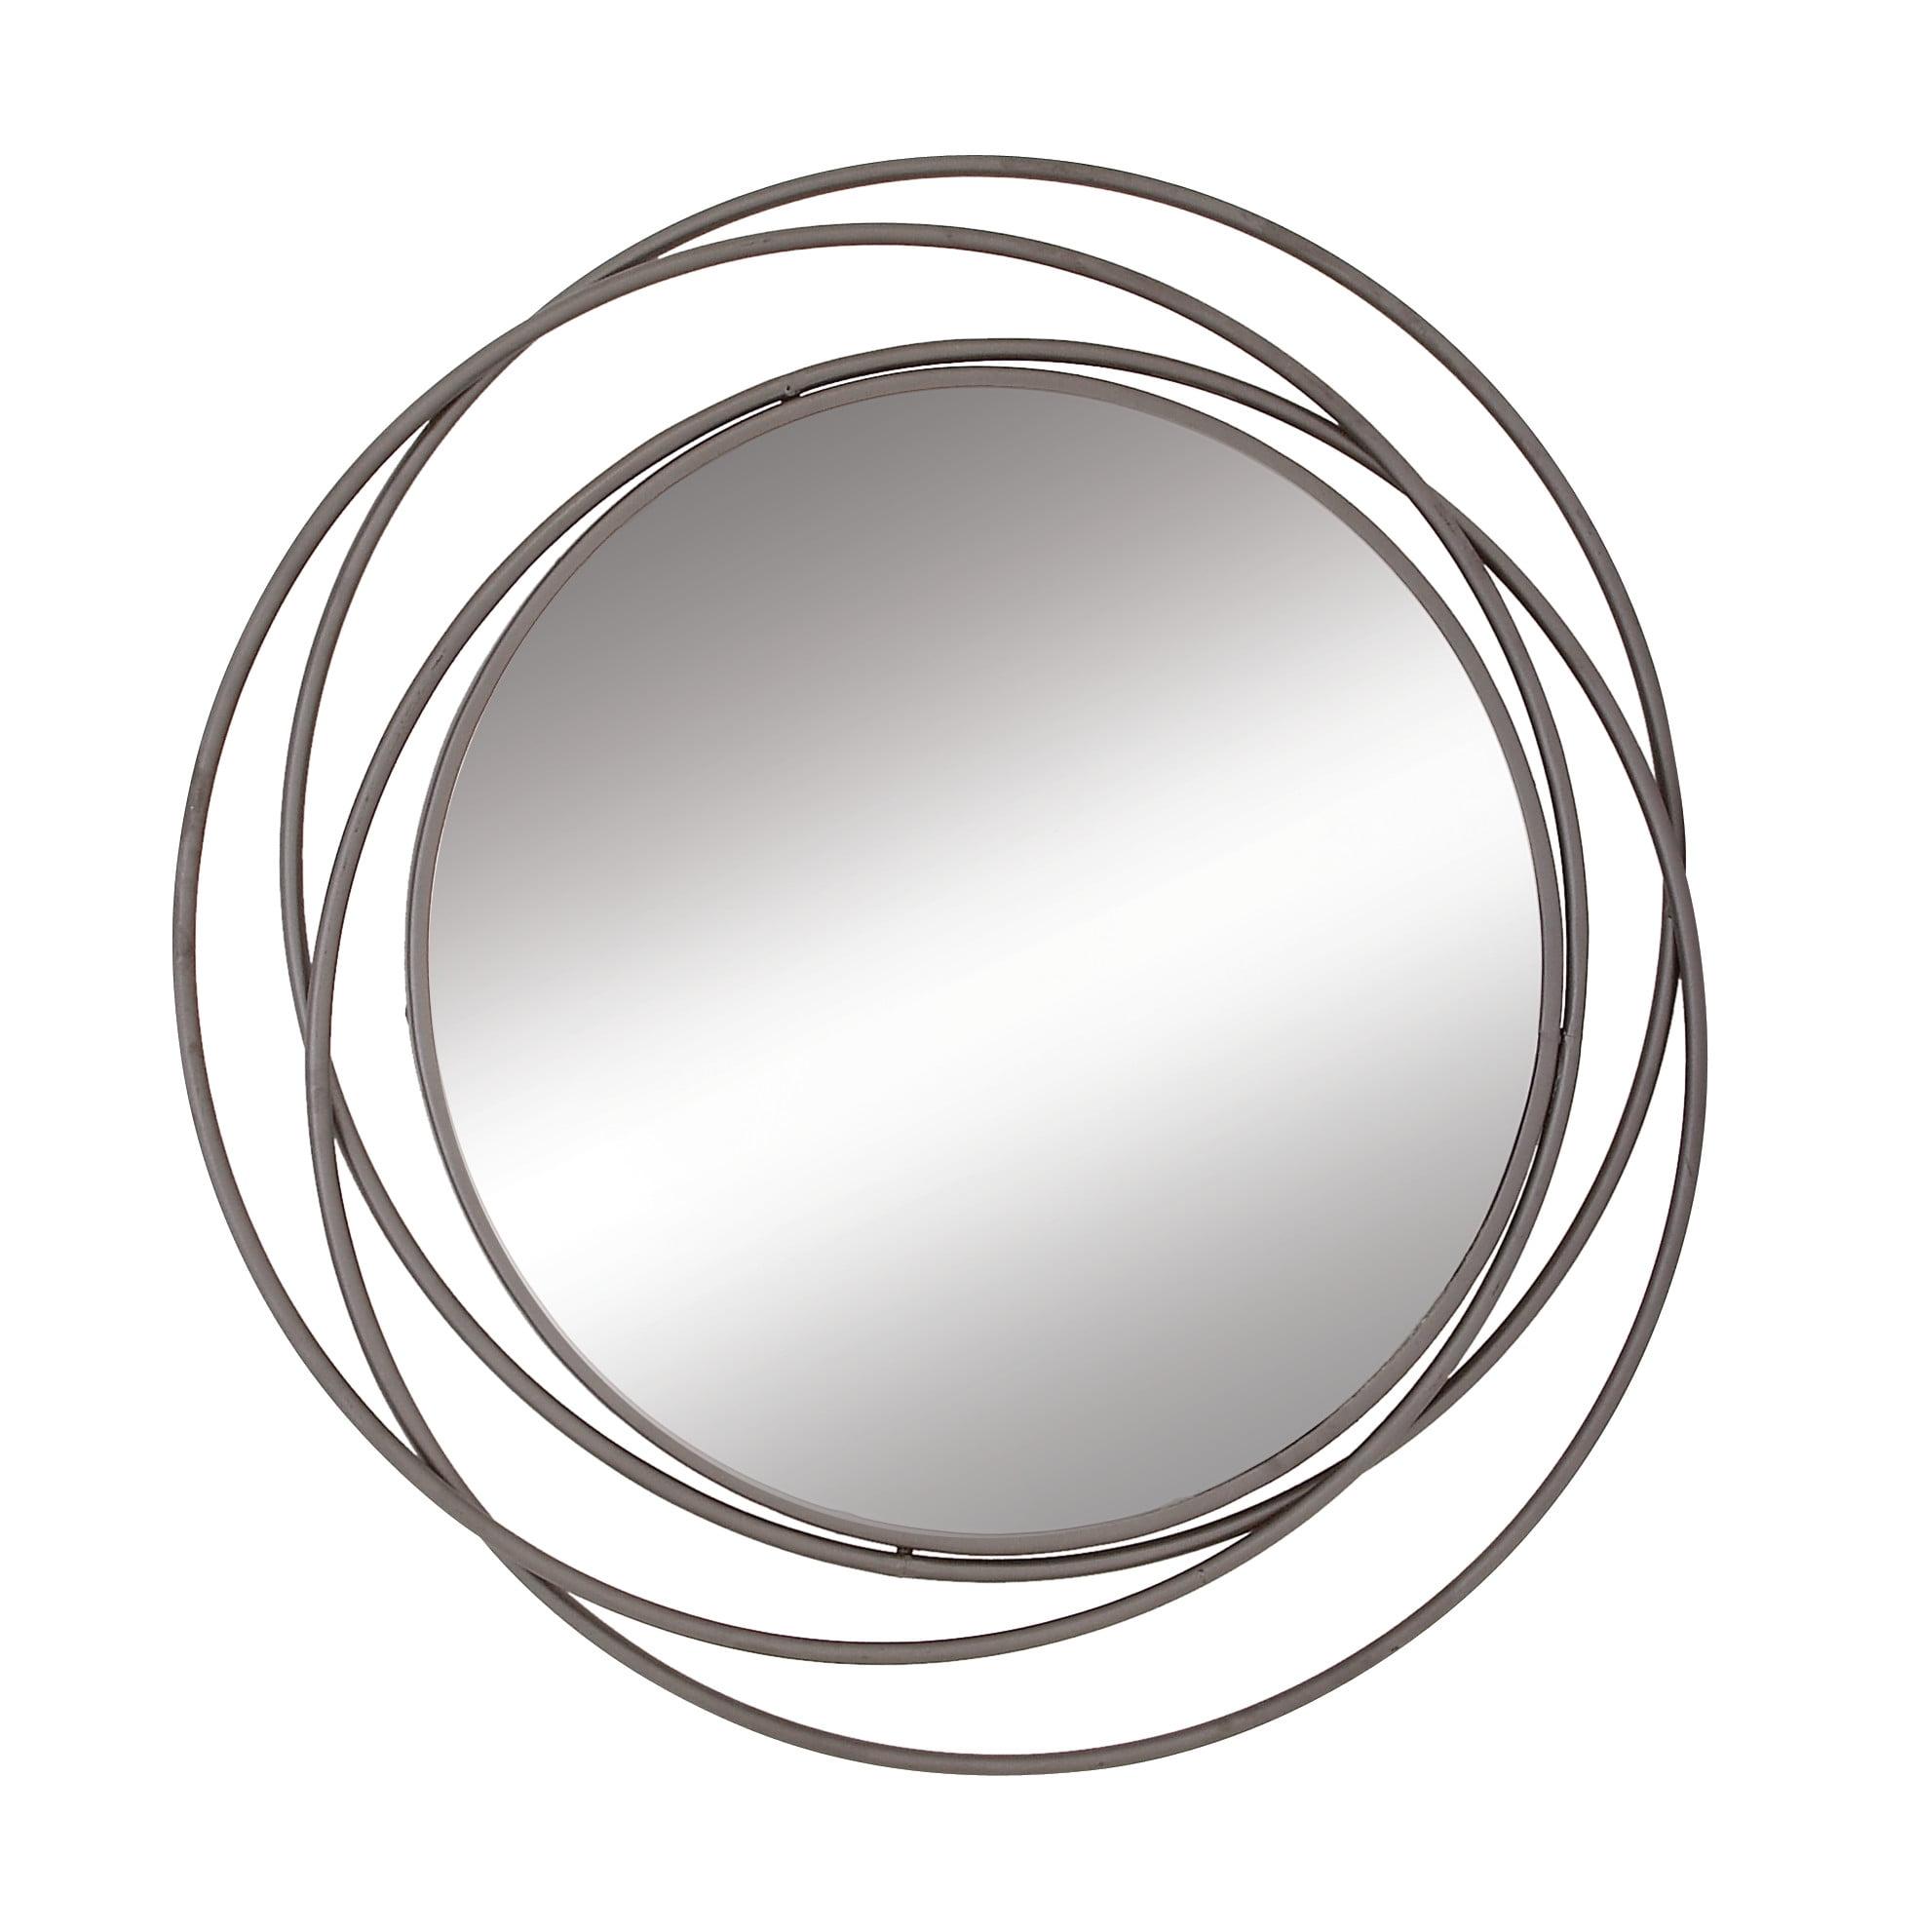 Elegant Overlapping Rings 42" Round Wood and Metal Wall Mirror